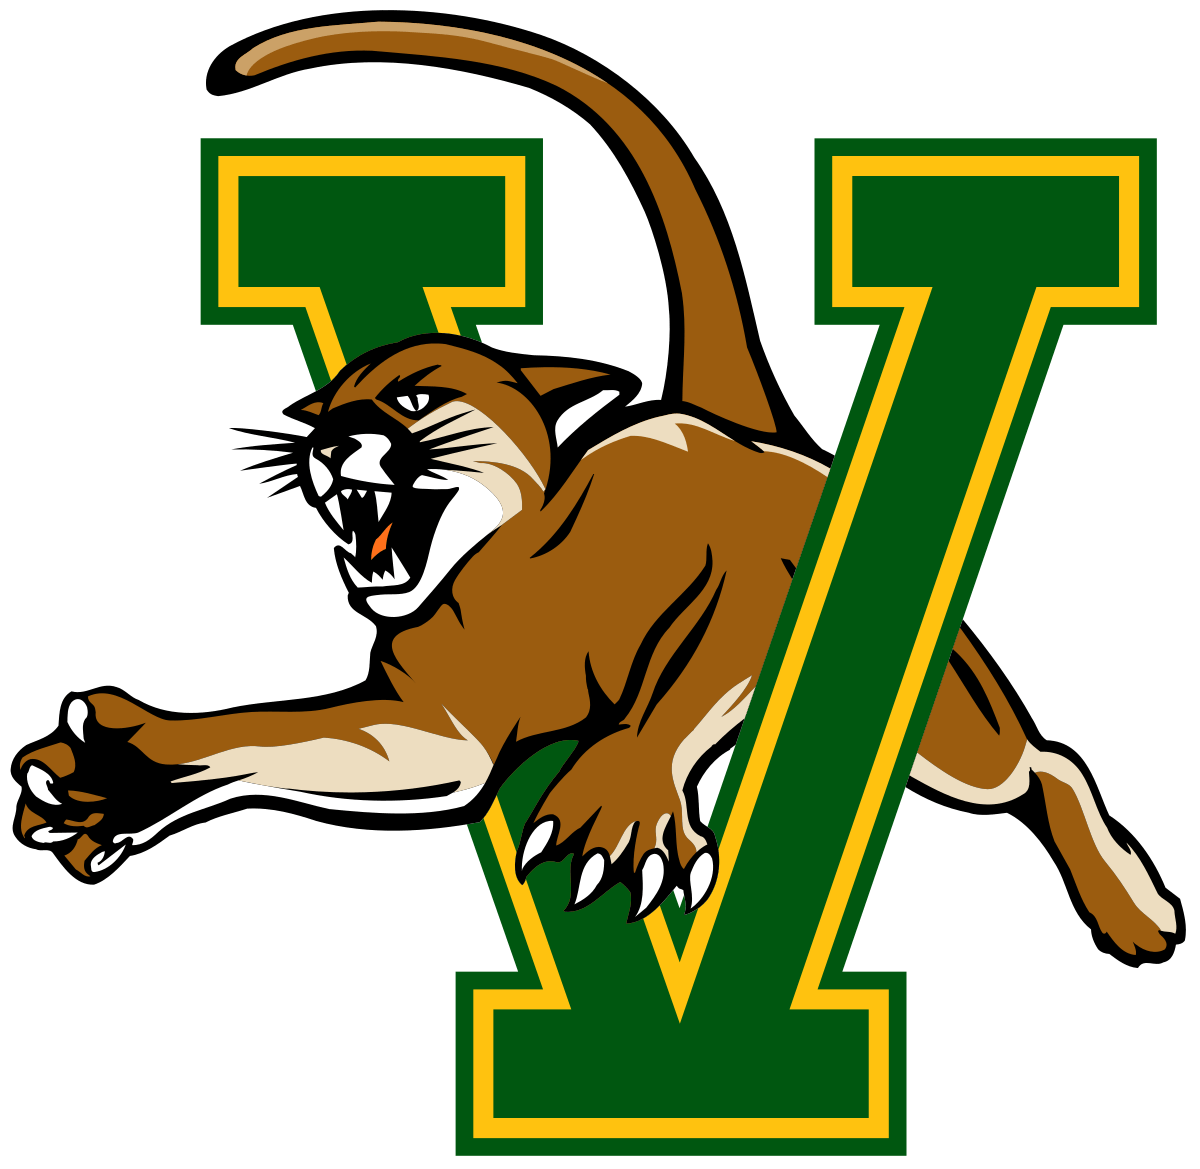 Green and Gold Wildcat Logo - Vermont Catamounts